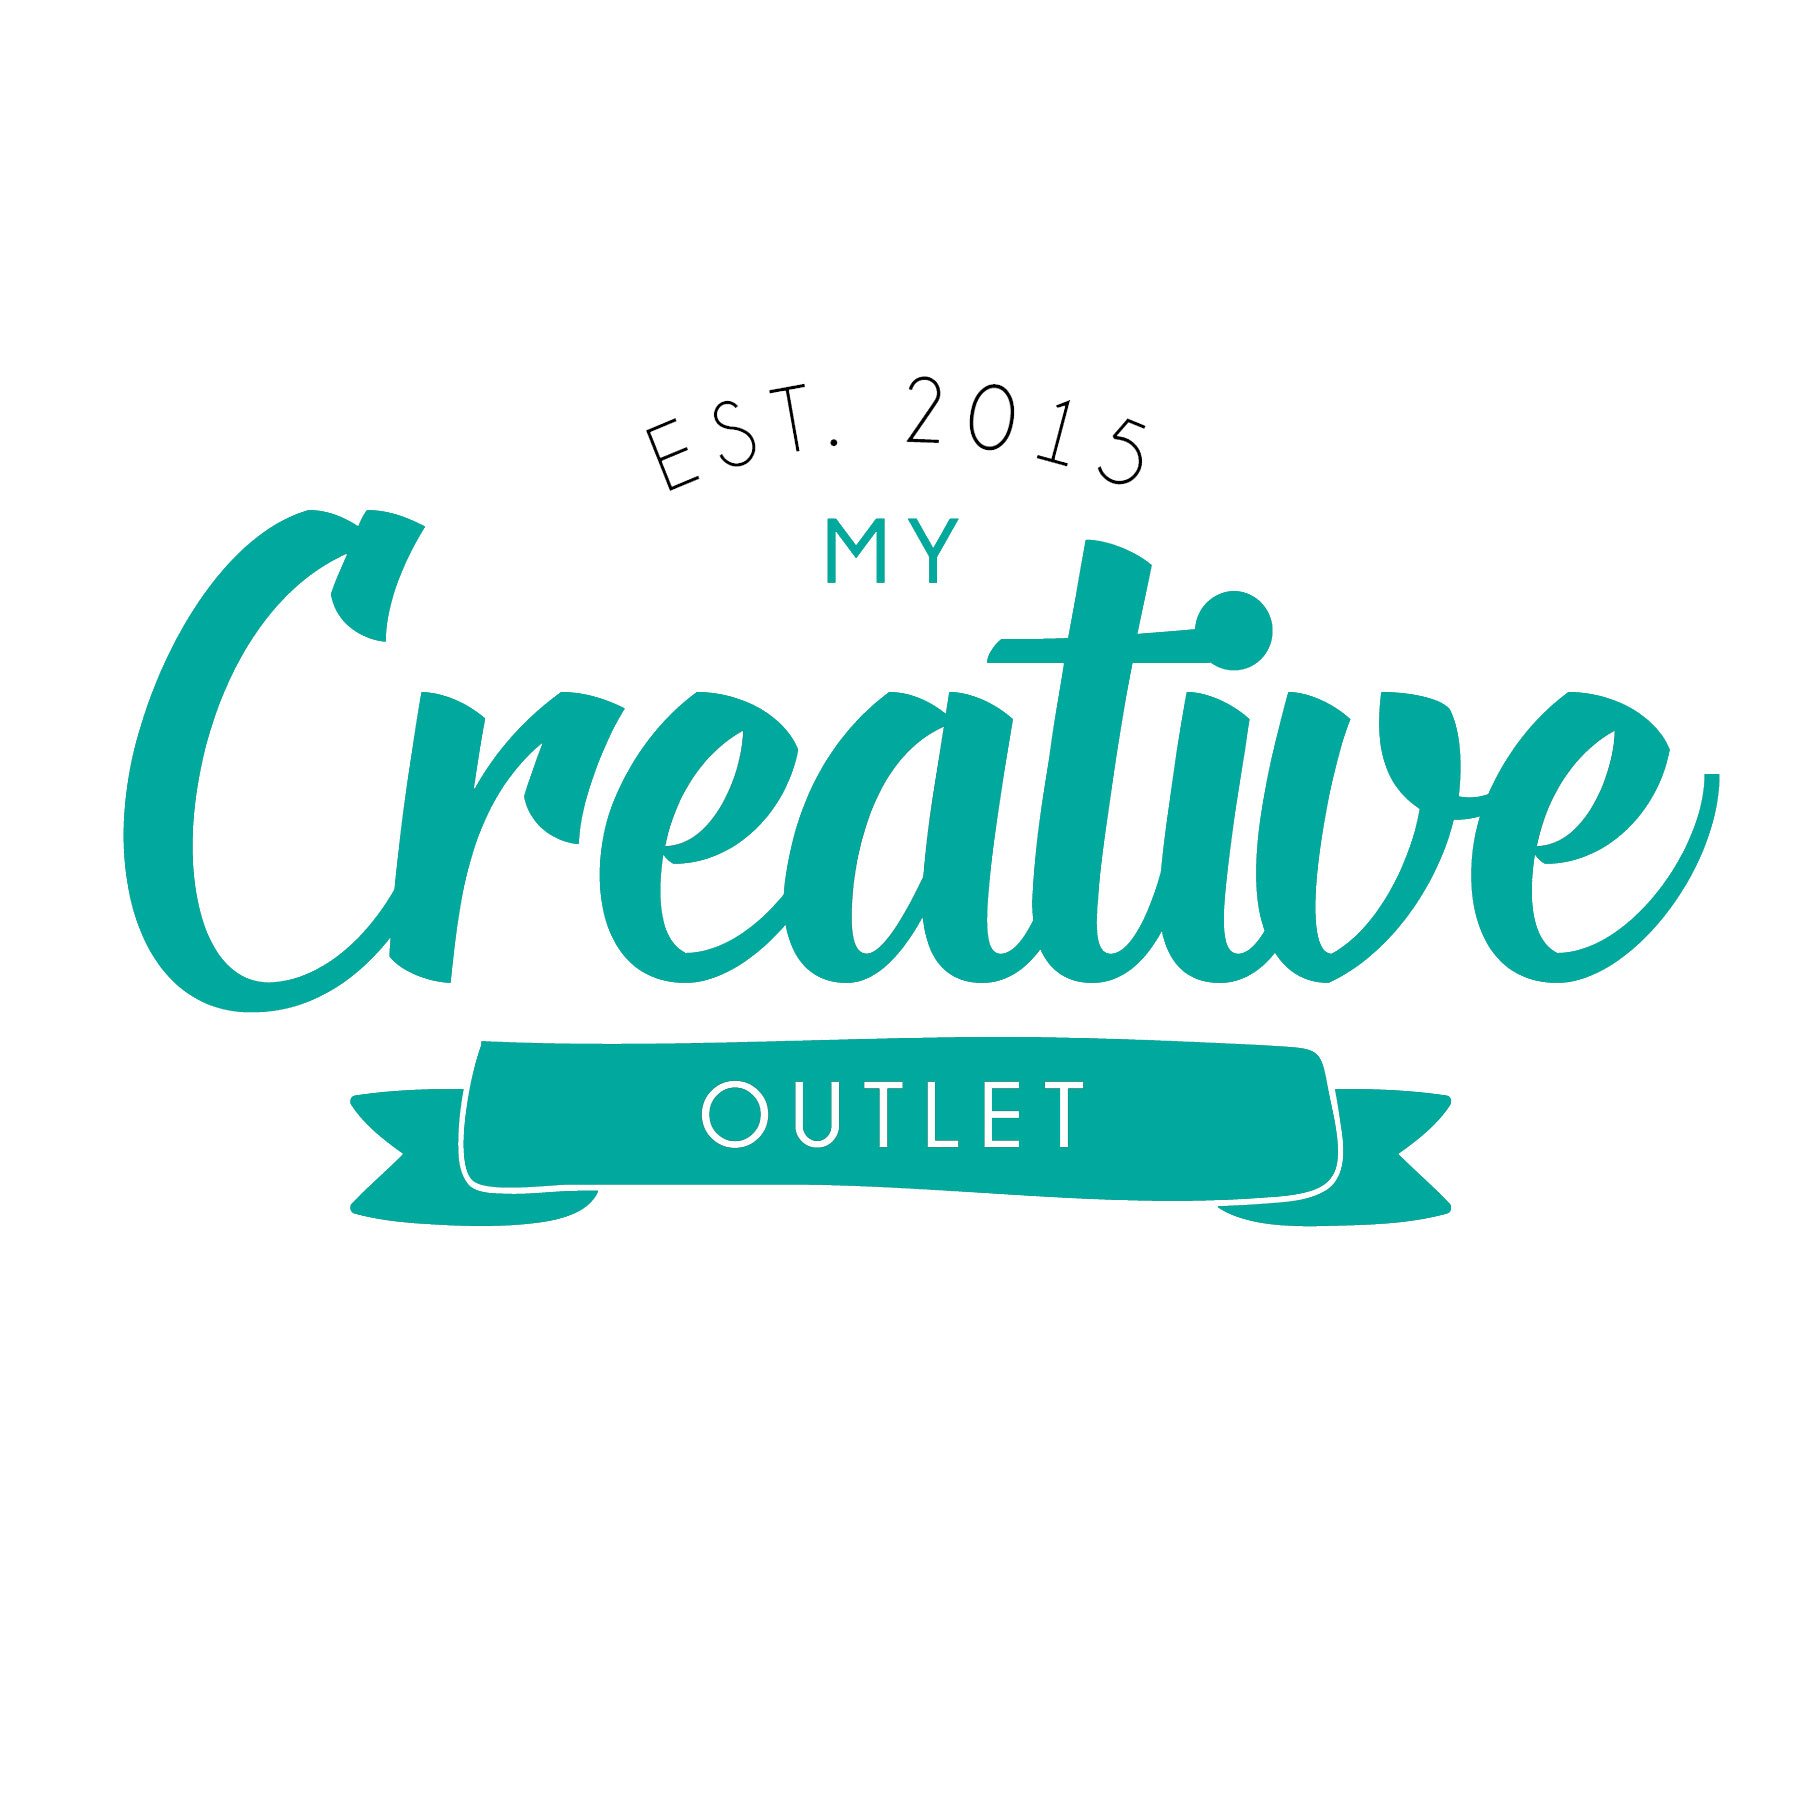 Owner of My Creative Outlet. Artist Boutique, Creative Workshops & Gallery Events in Chatsworth